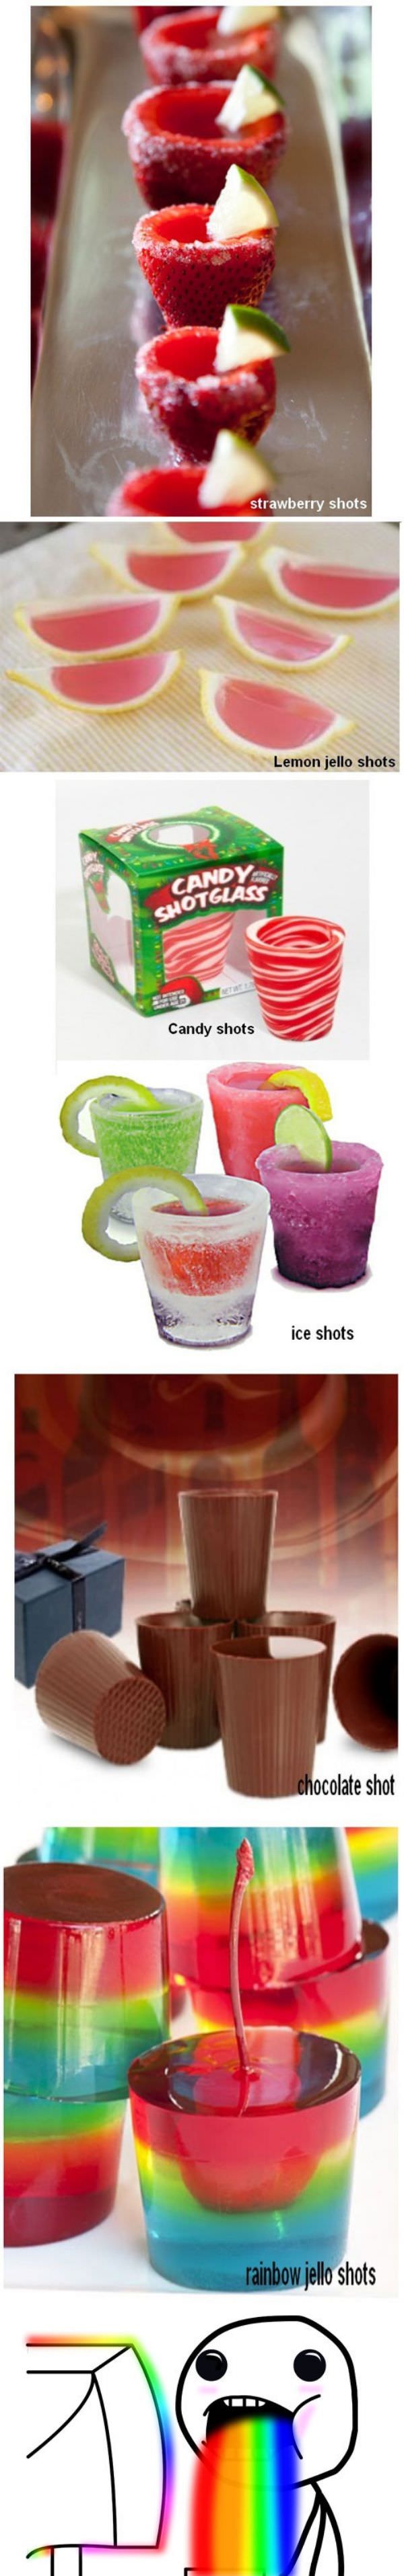 Types Of Shots